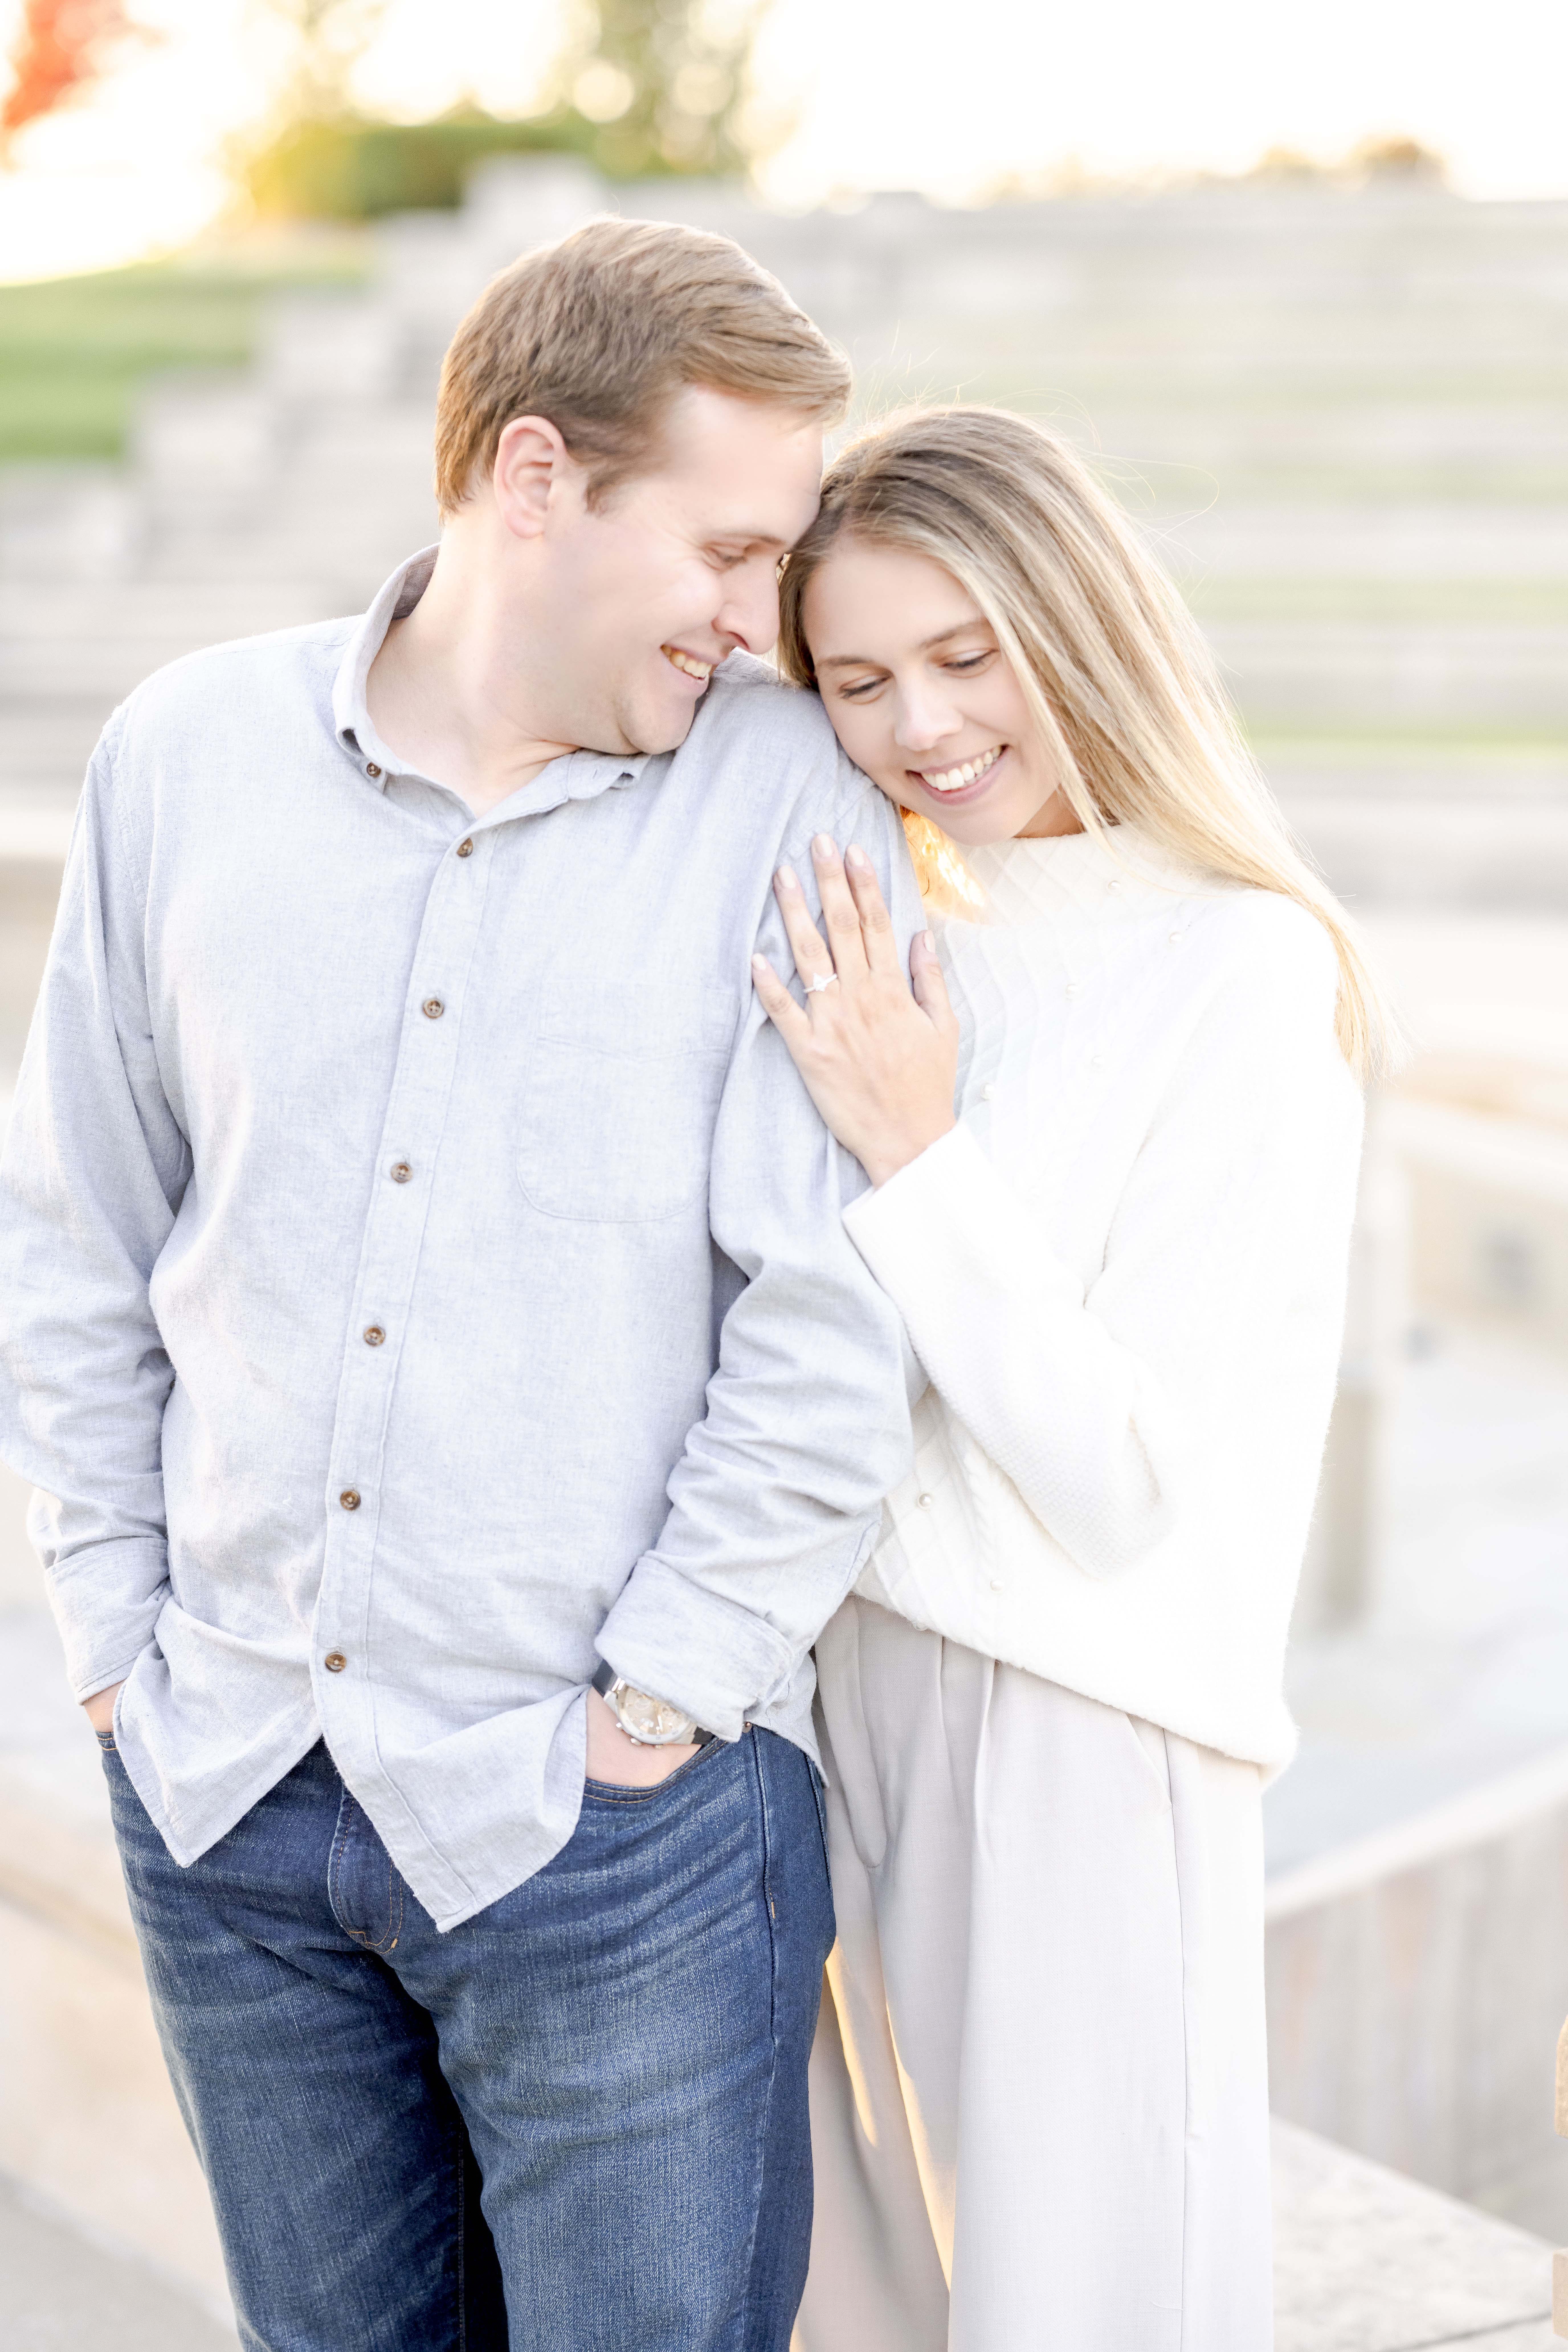 Fall engagement photos at Coxhall Gardens in Carmel Indiana